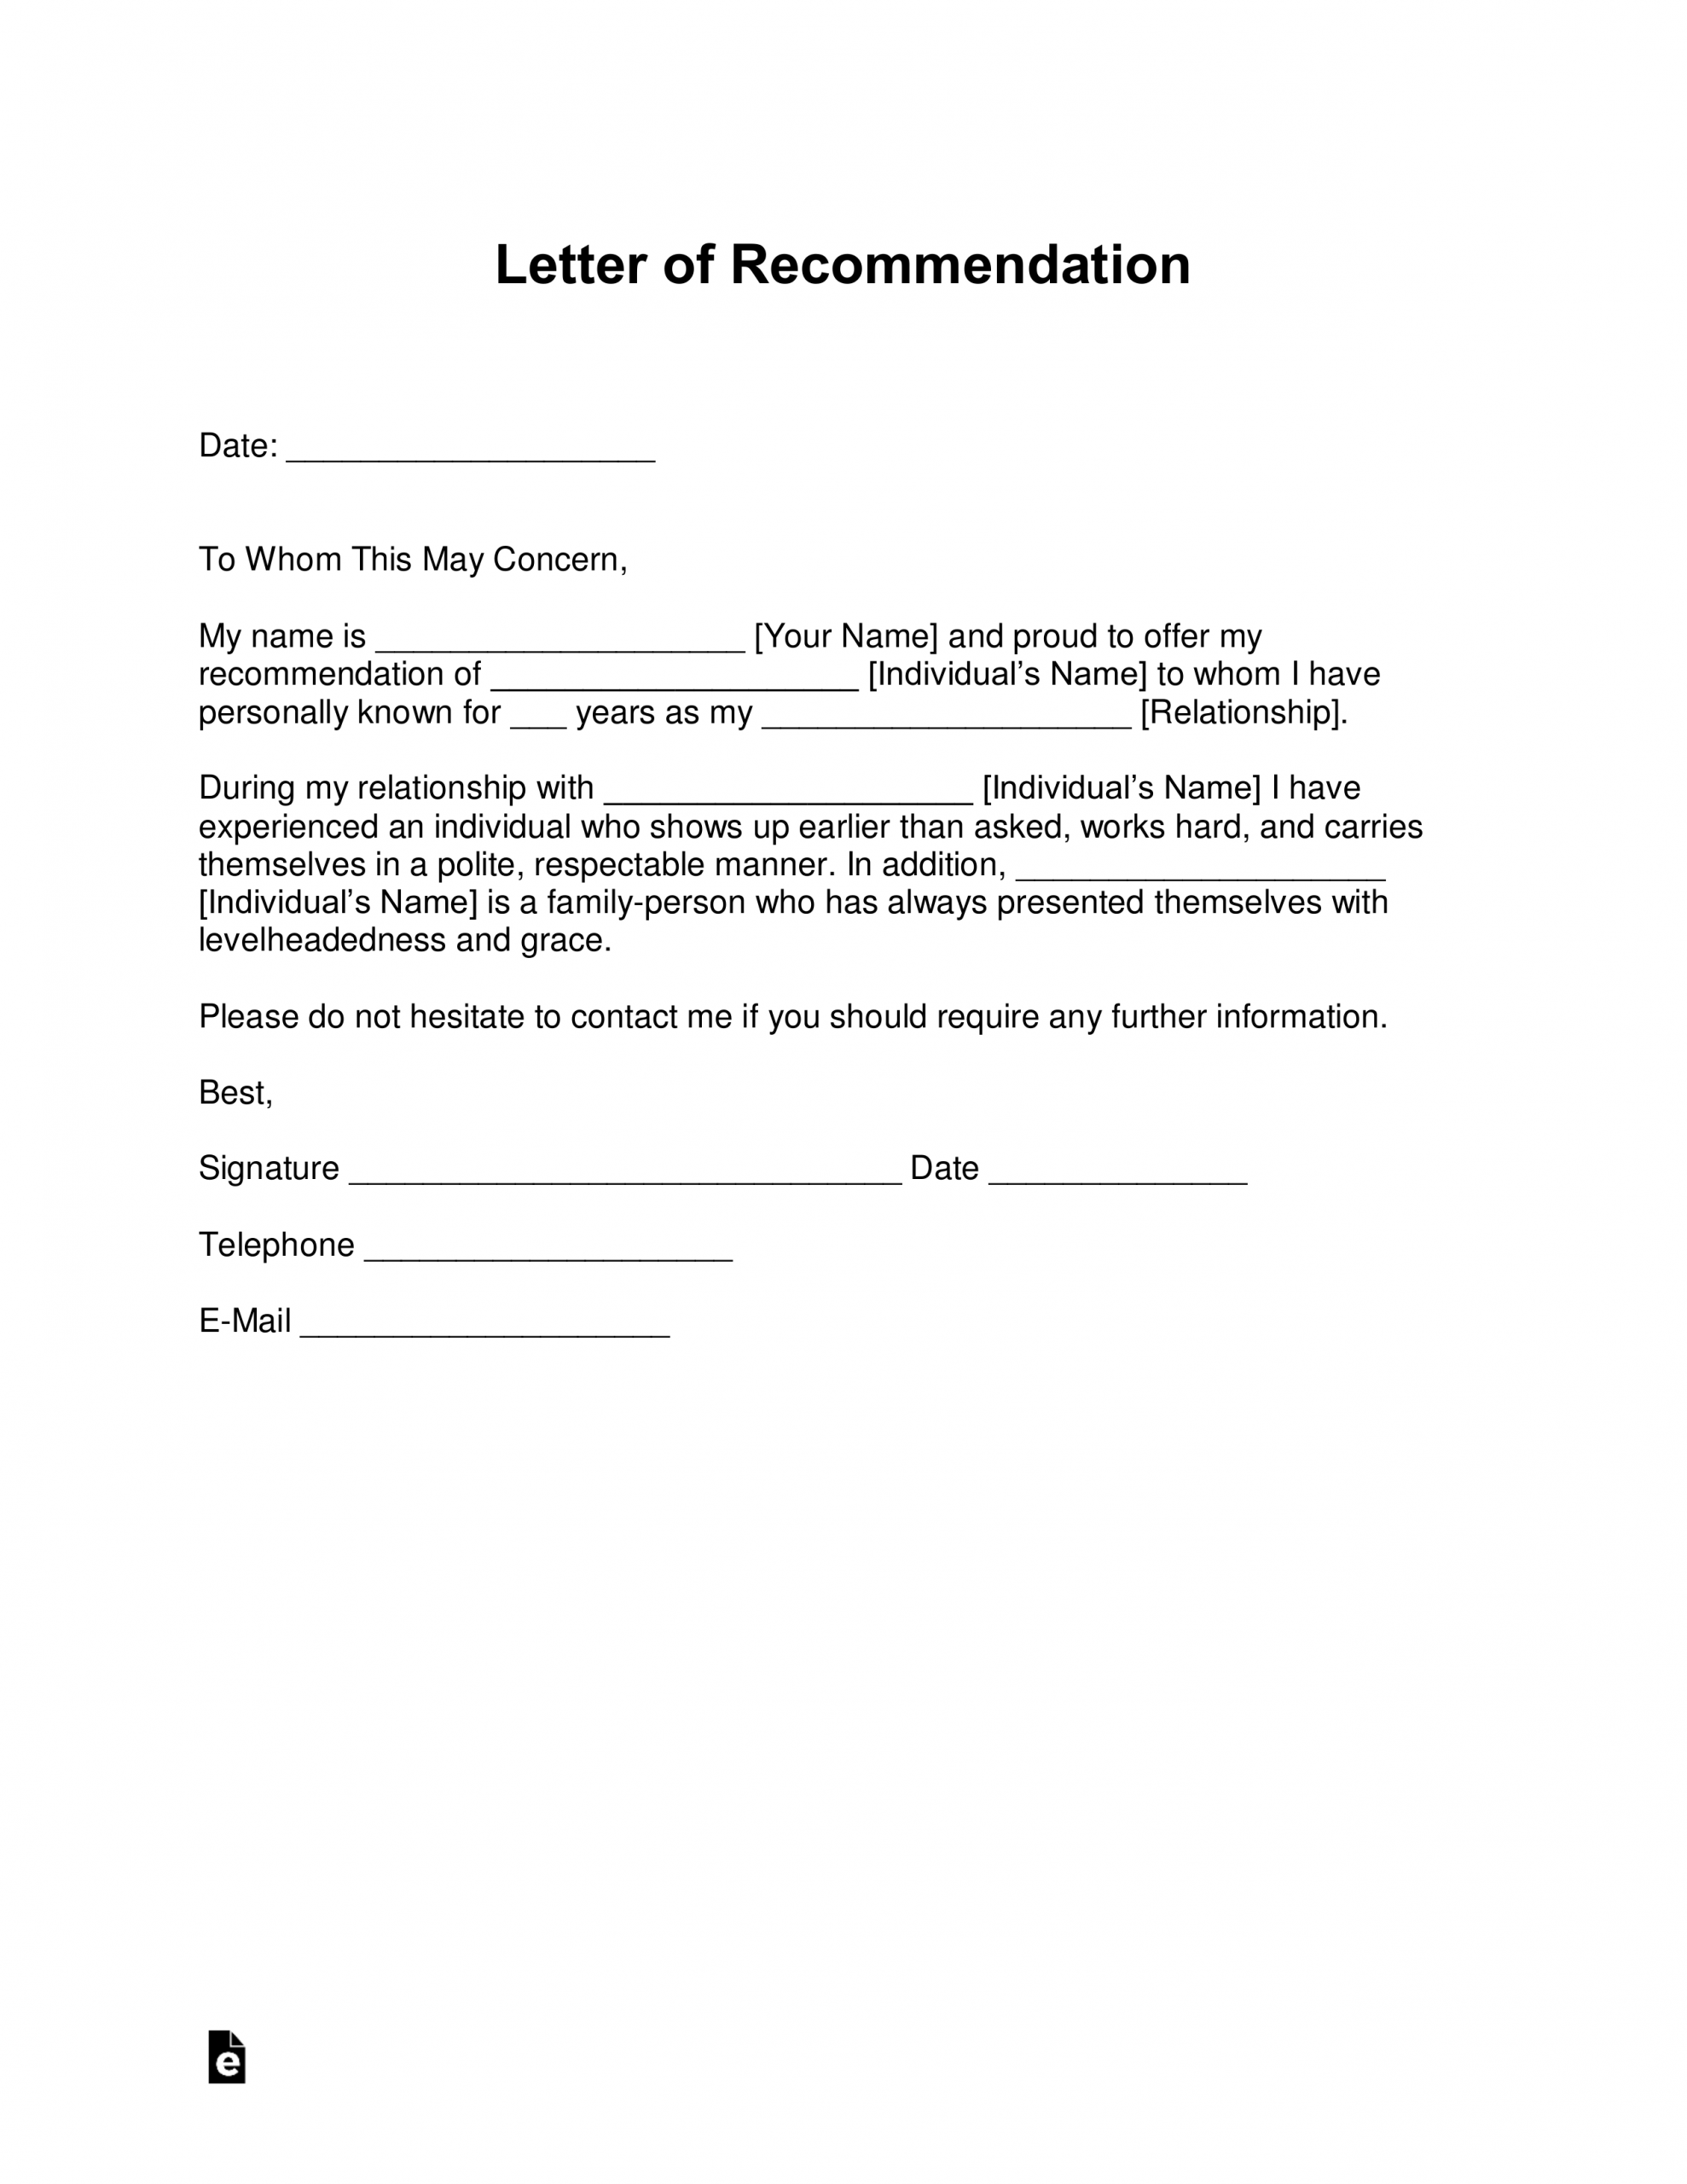 Free Letter Of Recommendation Templates Samples And pertaining to dimensions 2550 X 3301